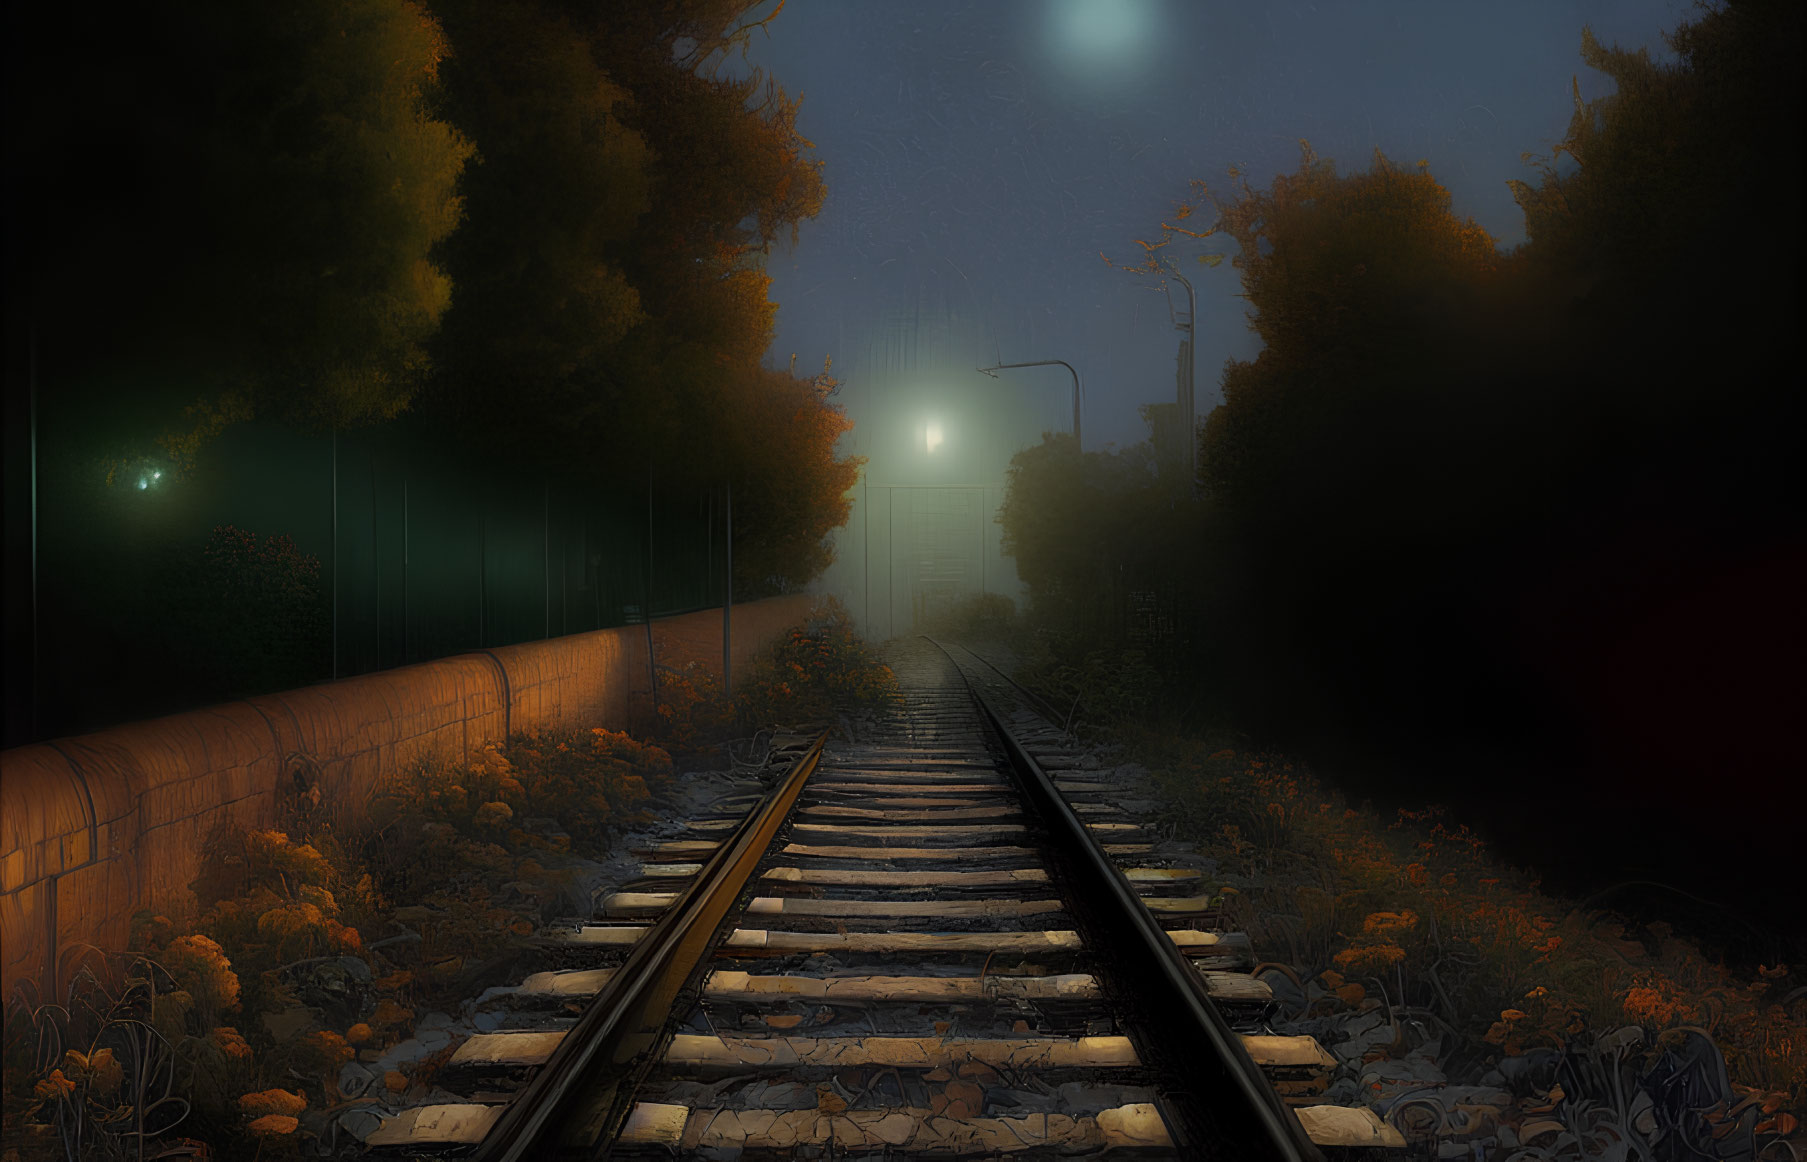 Nighttime railroad tracks bordered by trees and streetlights, with orange flowers.